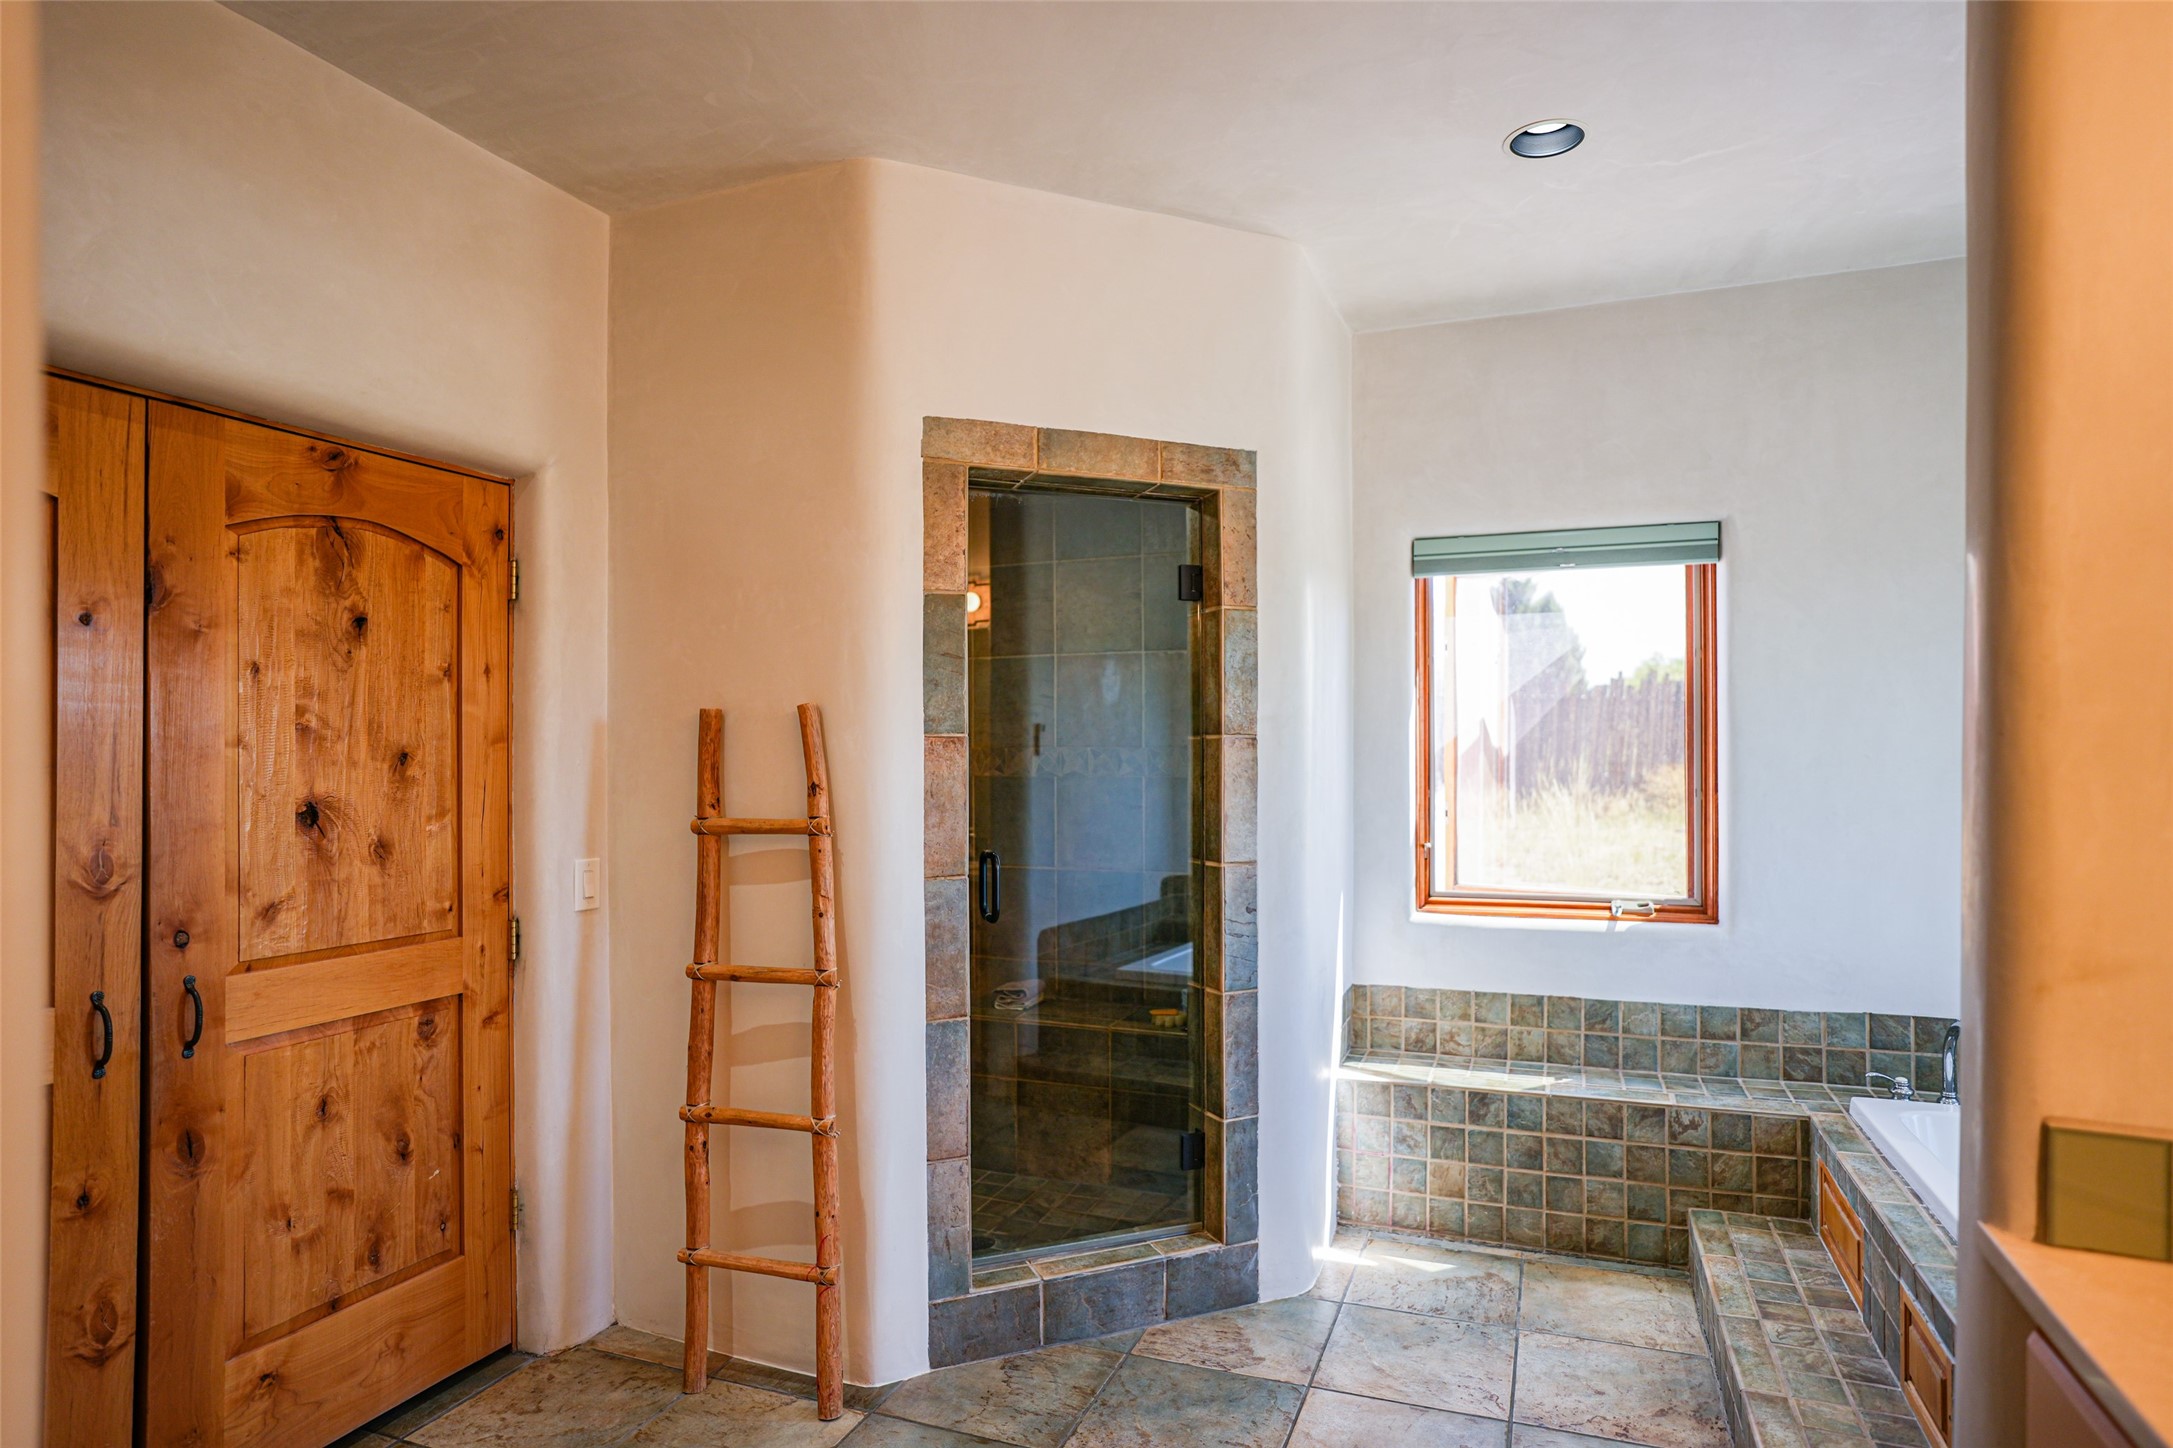 PRIMARY BATHROOM WITH ENCLOSED SHOWER AREA